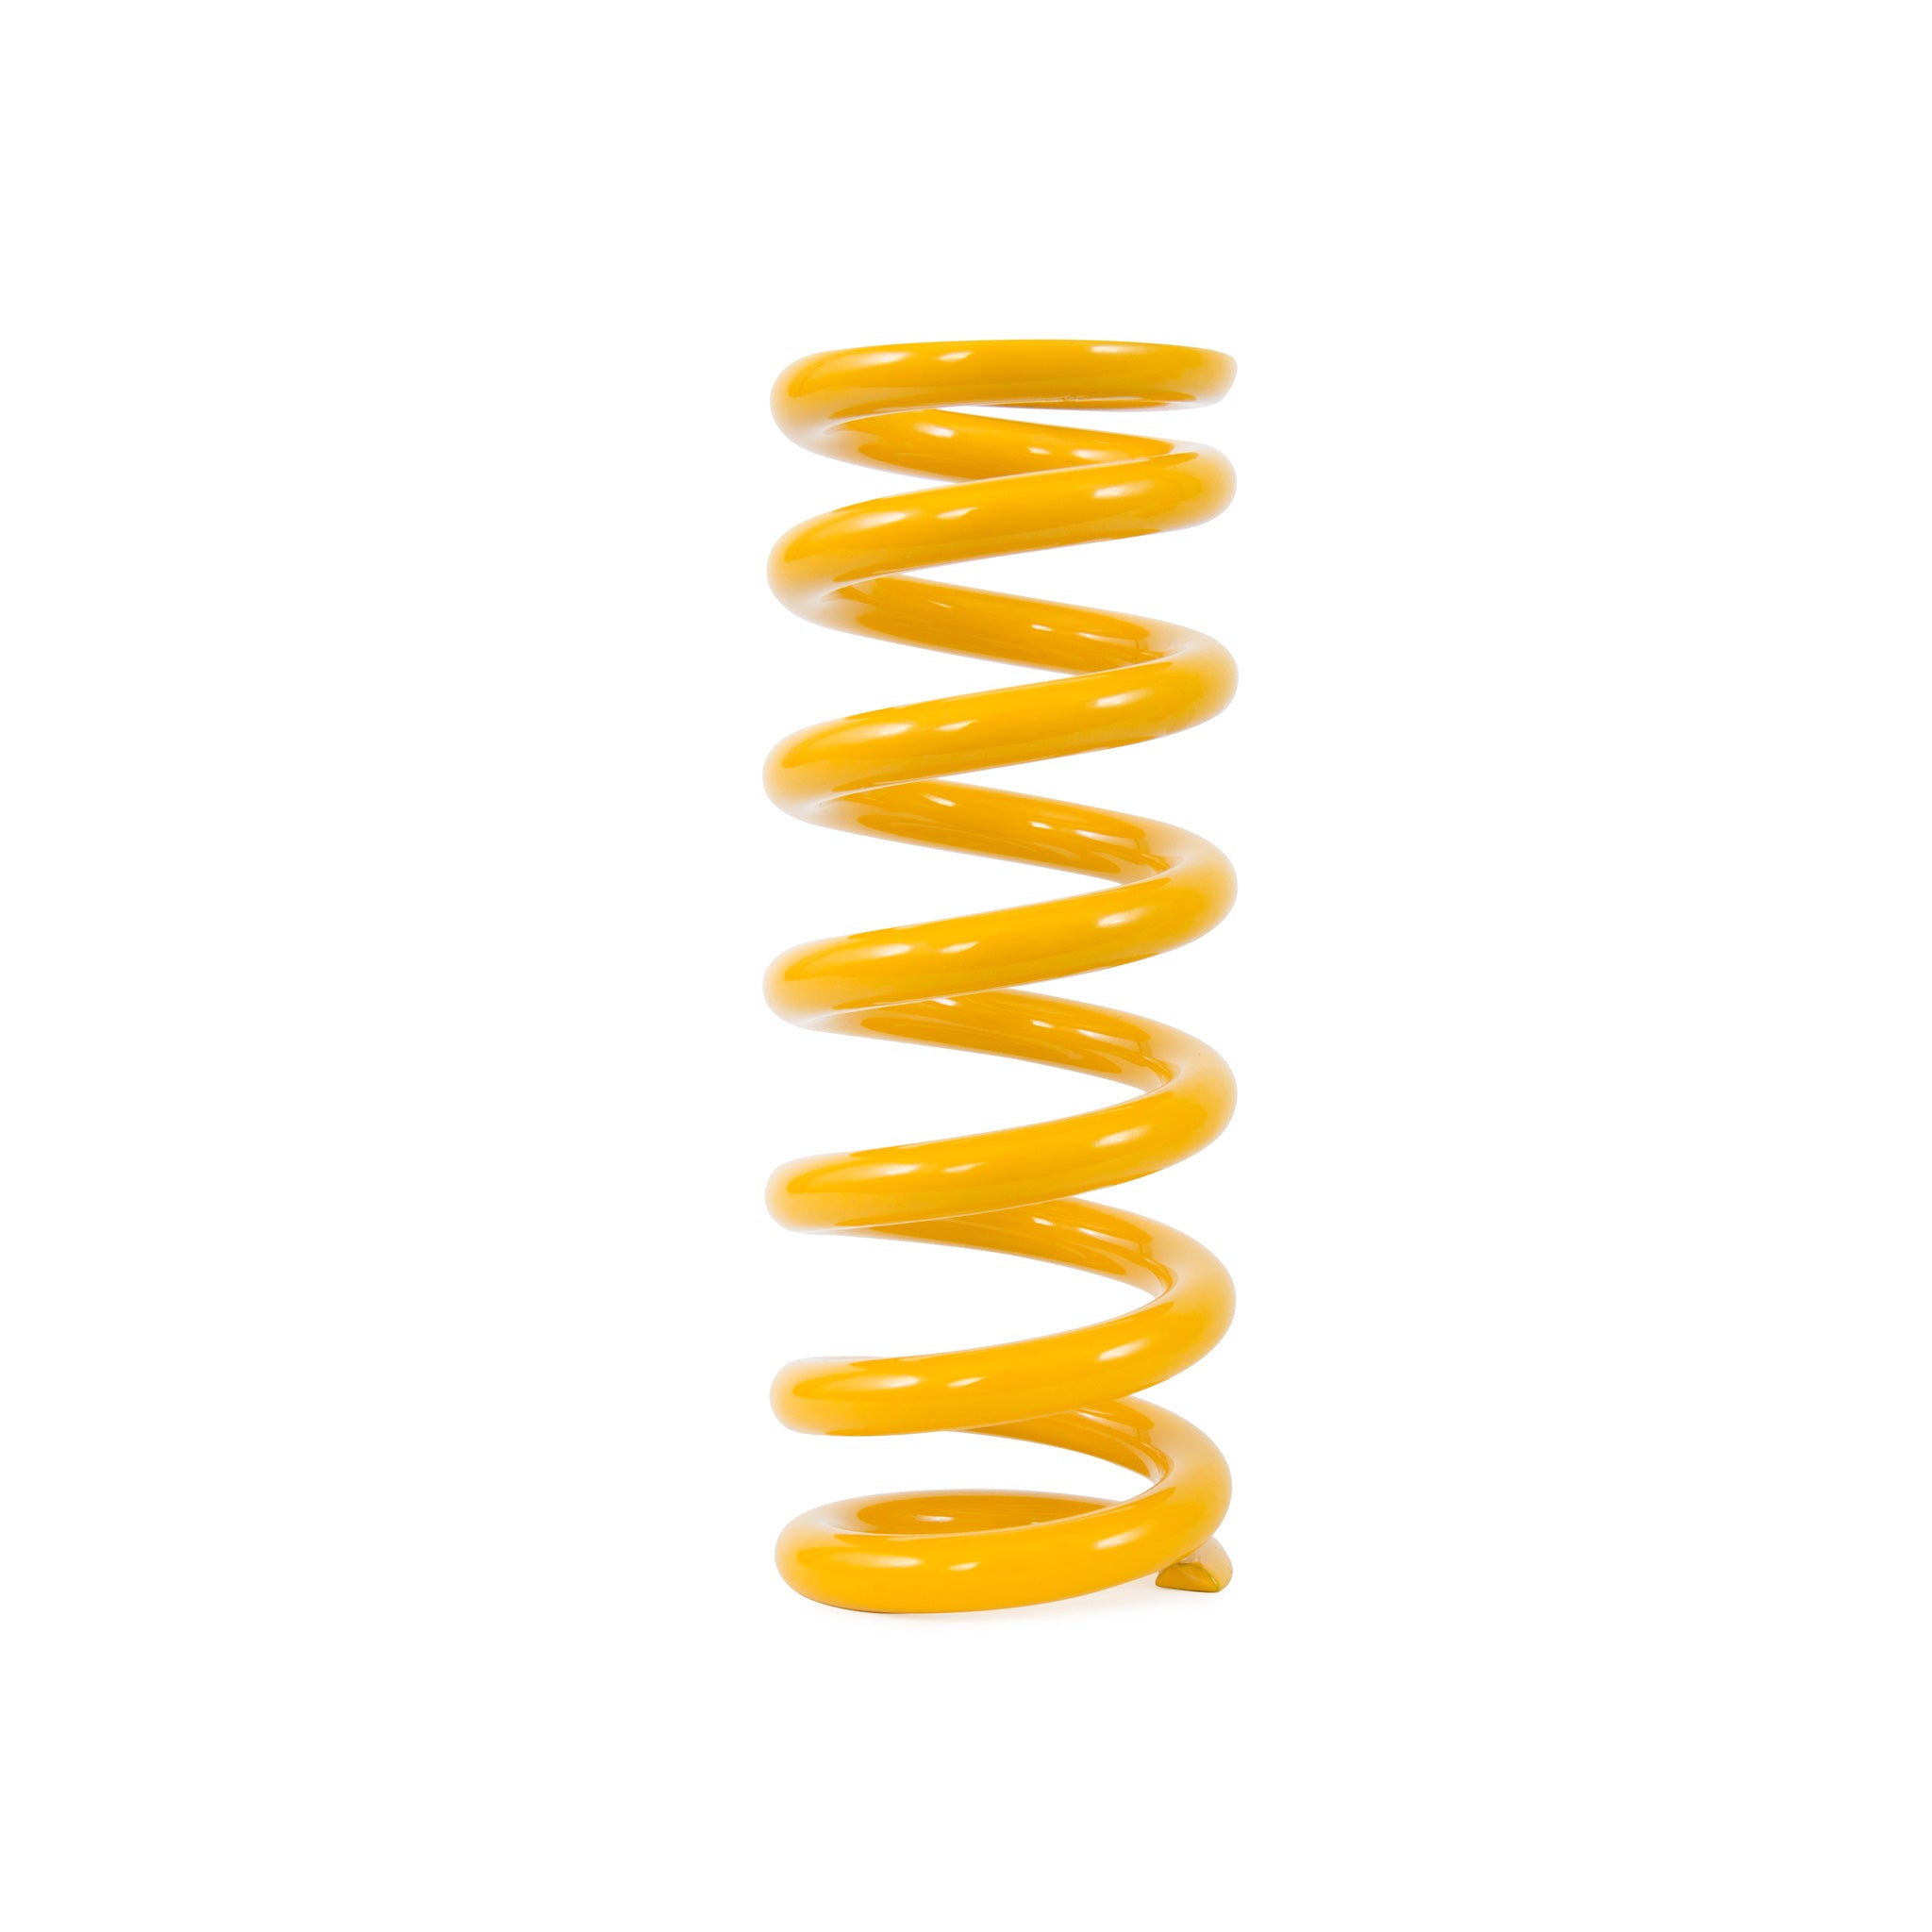 Ohlins Spring 89mm S x 365 lbs/in